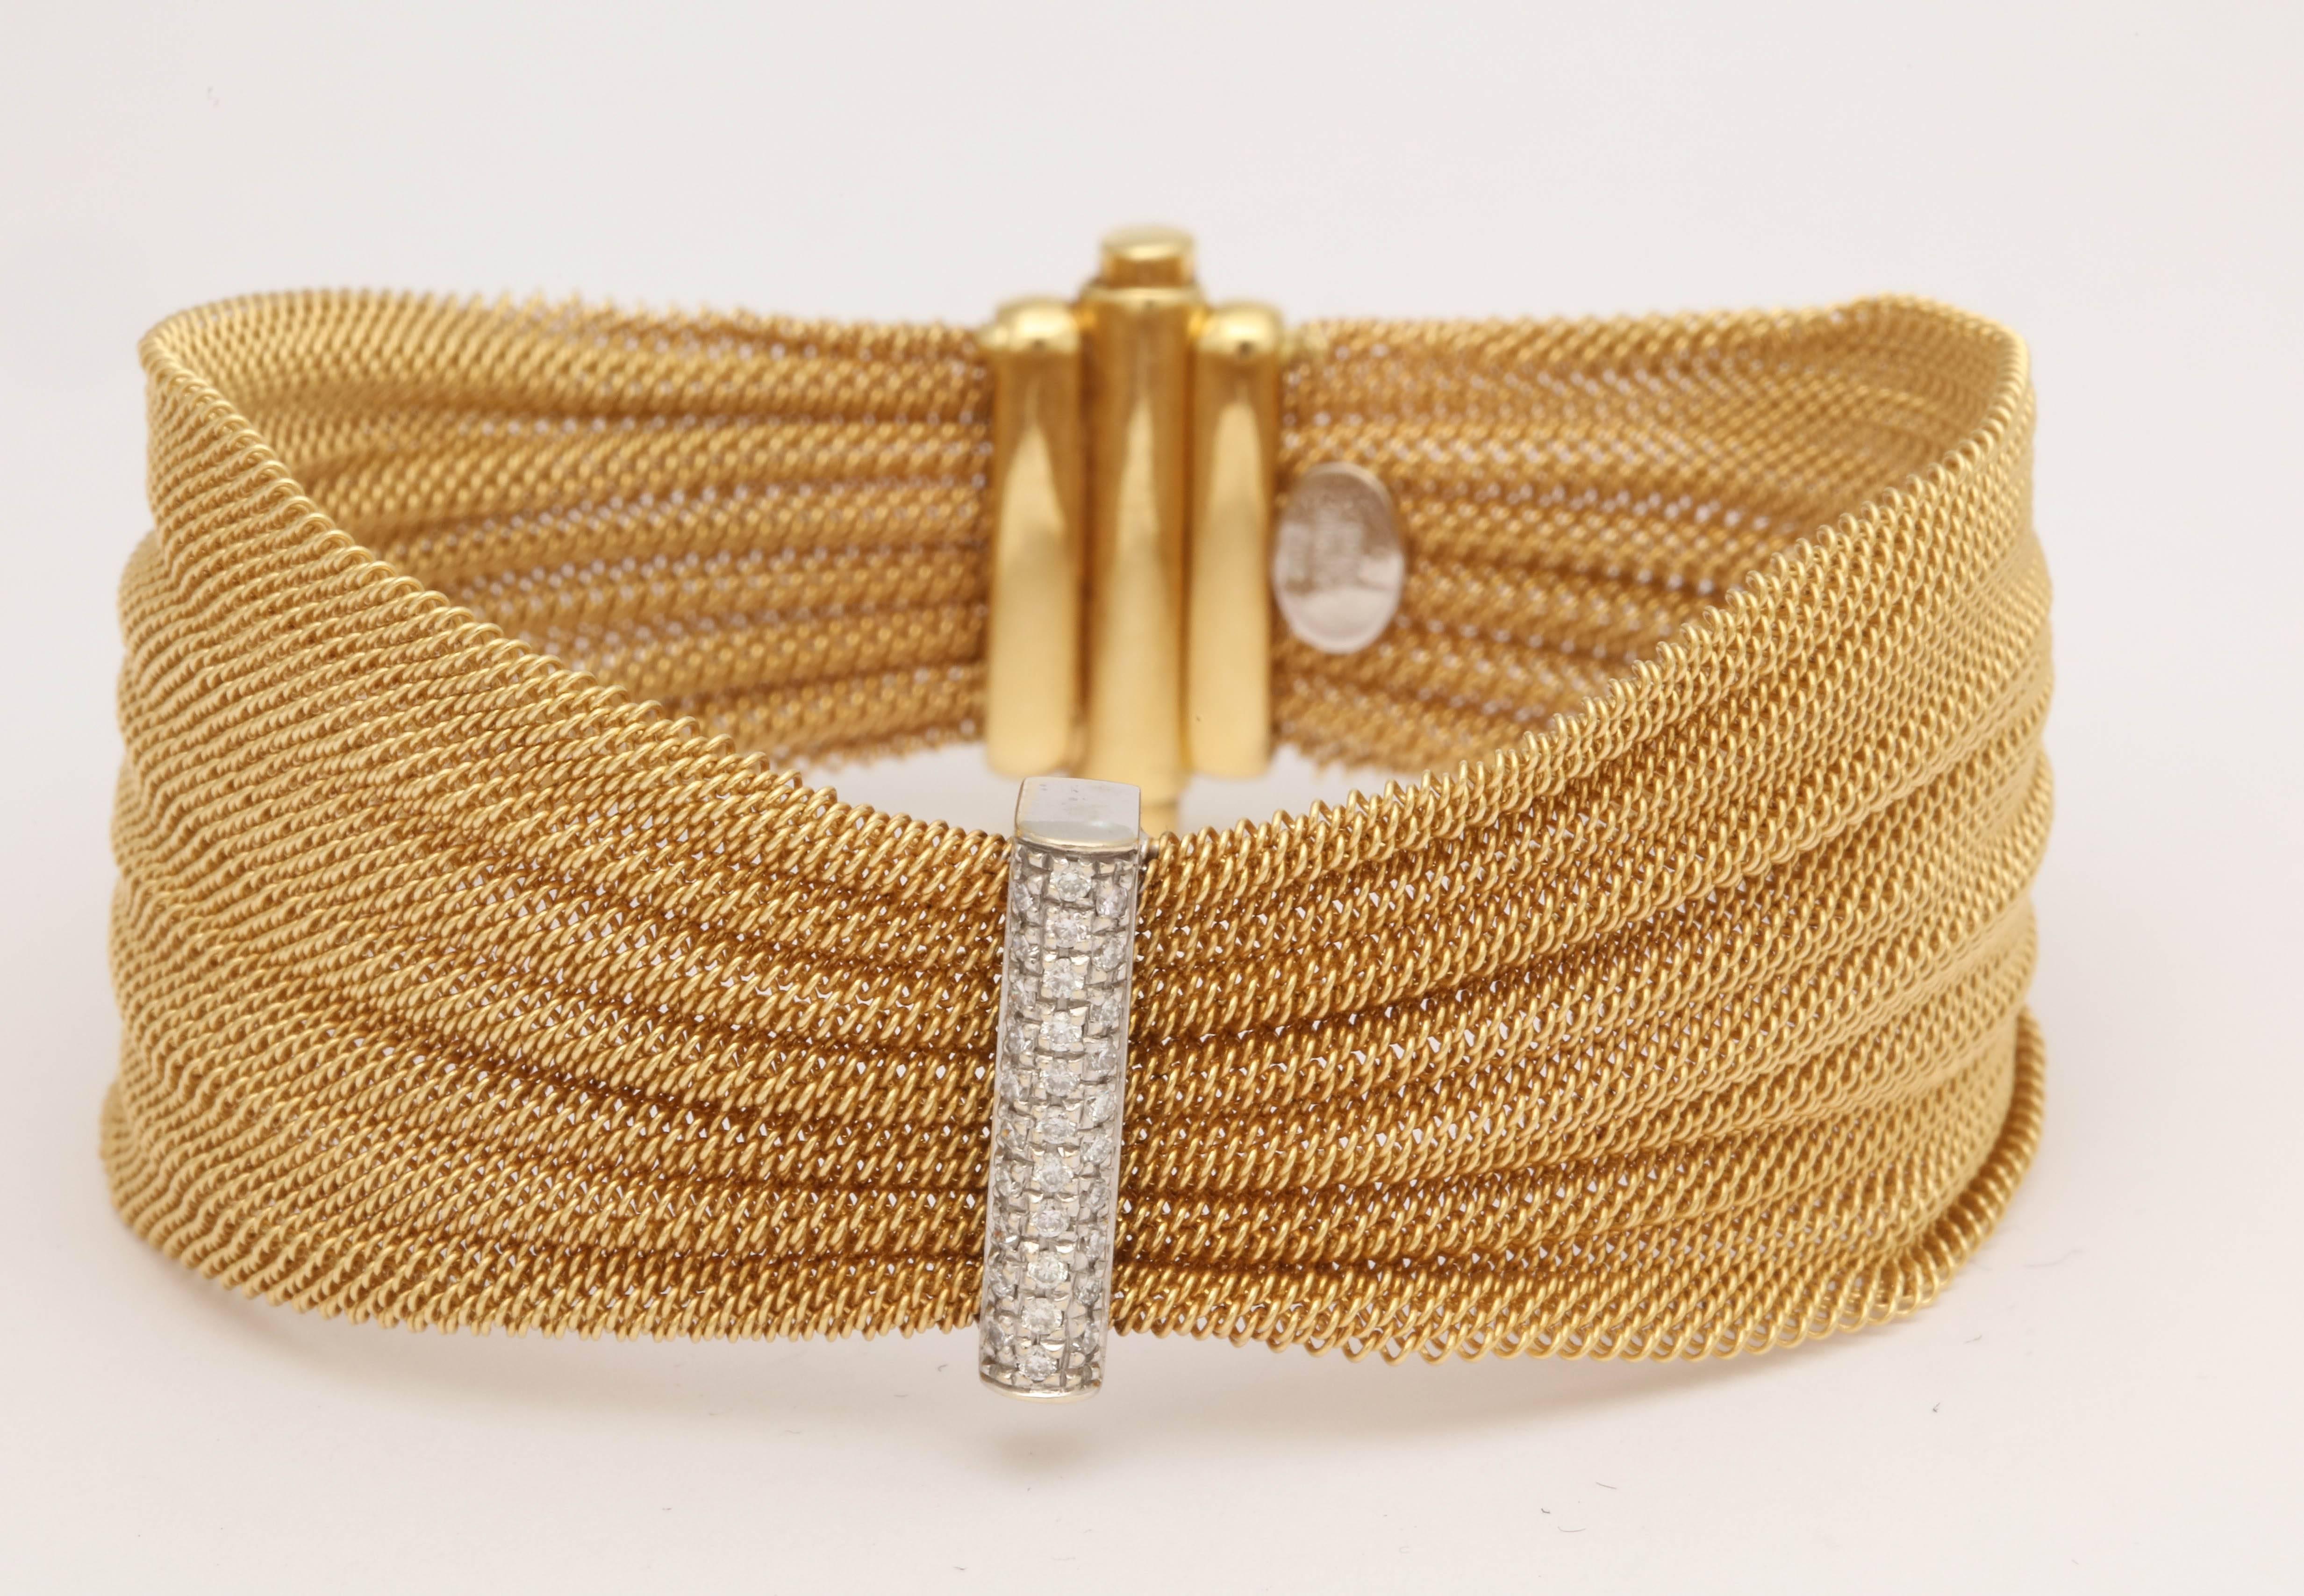 One Ladies Woven Light And Airy Delicate Flexible Mesh Bracelet With A Ribbon And Bow Motif Design Centering Three Rows Of Diamonds. Bracelet Made In 18kt Yellow gold In the 1960's.Beautifully Finished With an Invisible double lock Lipstick Clasp.